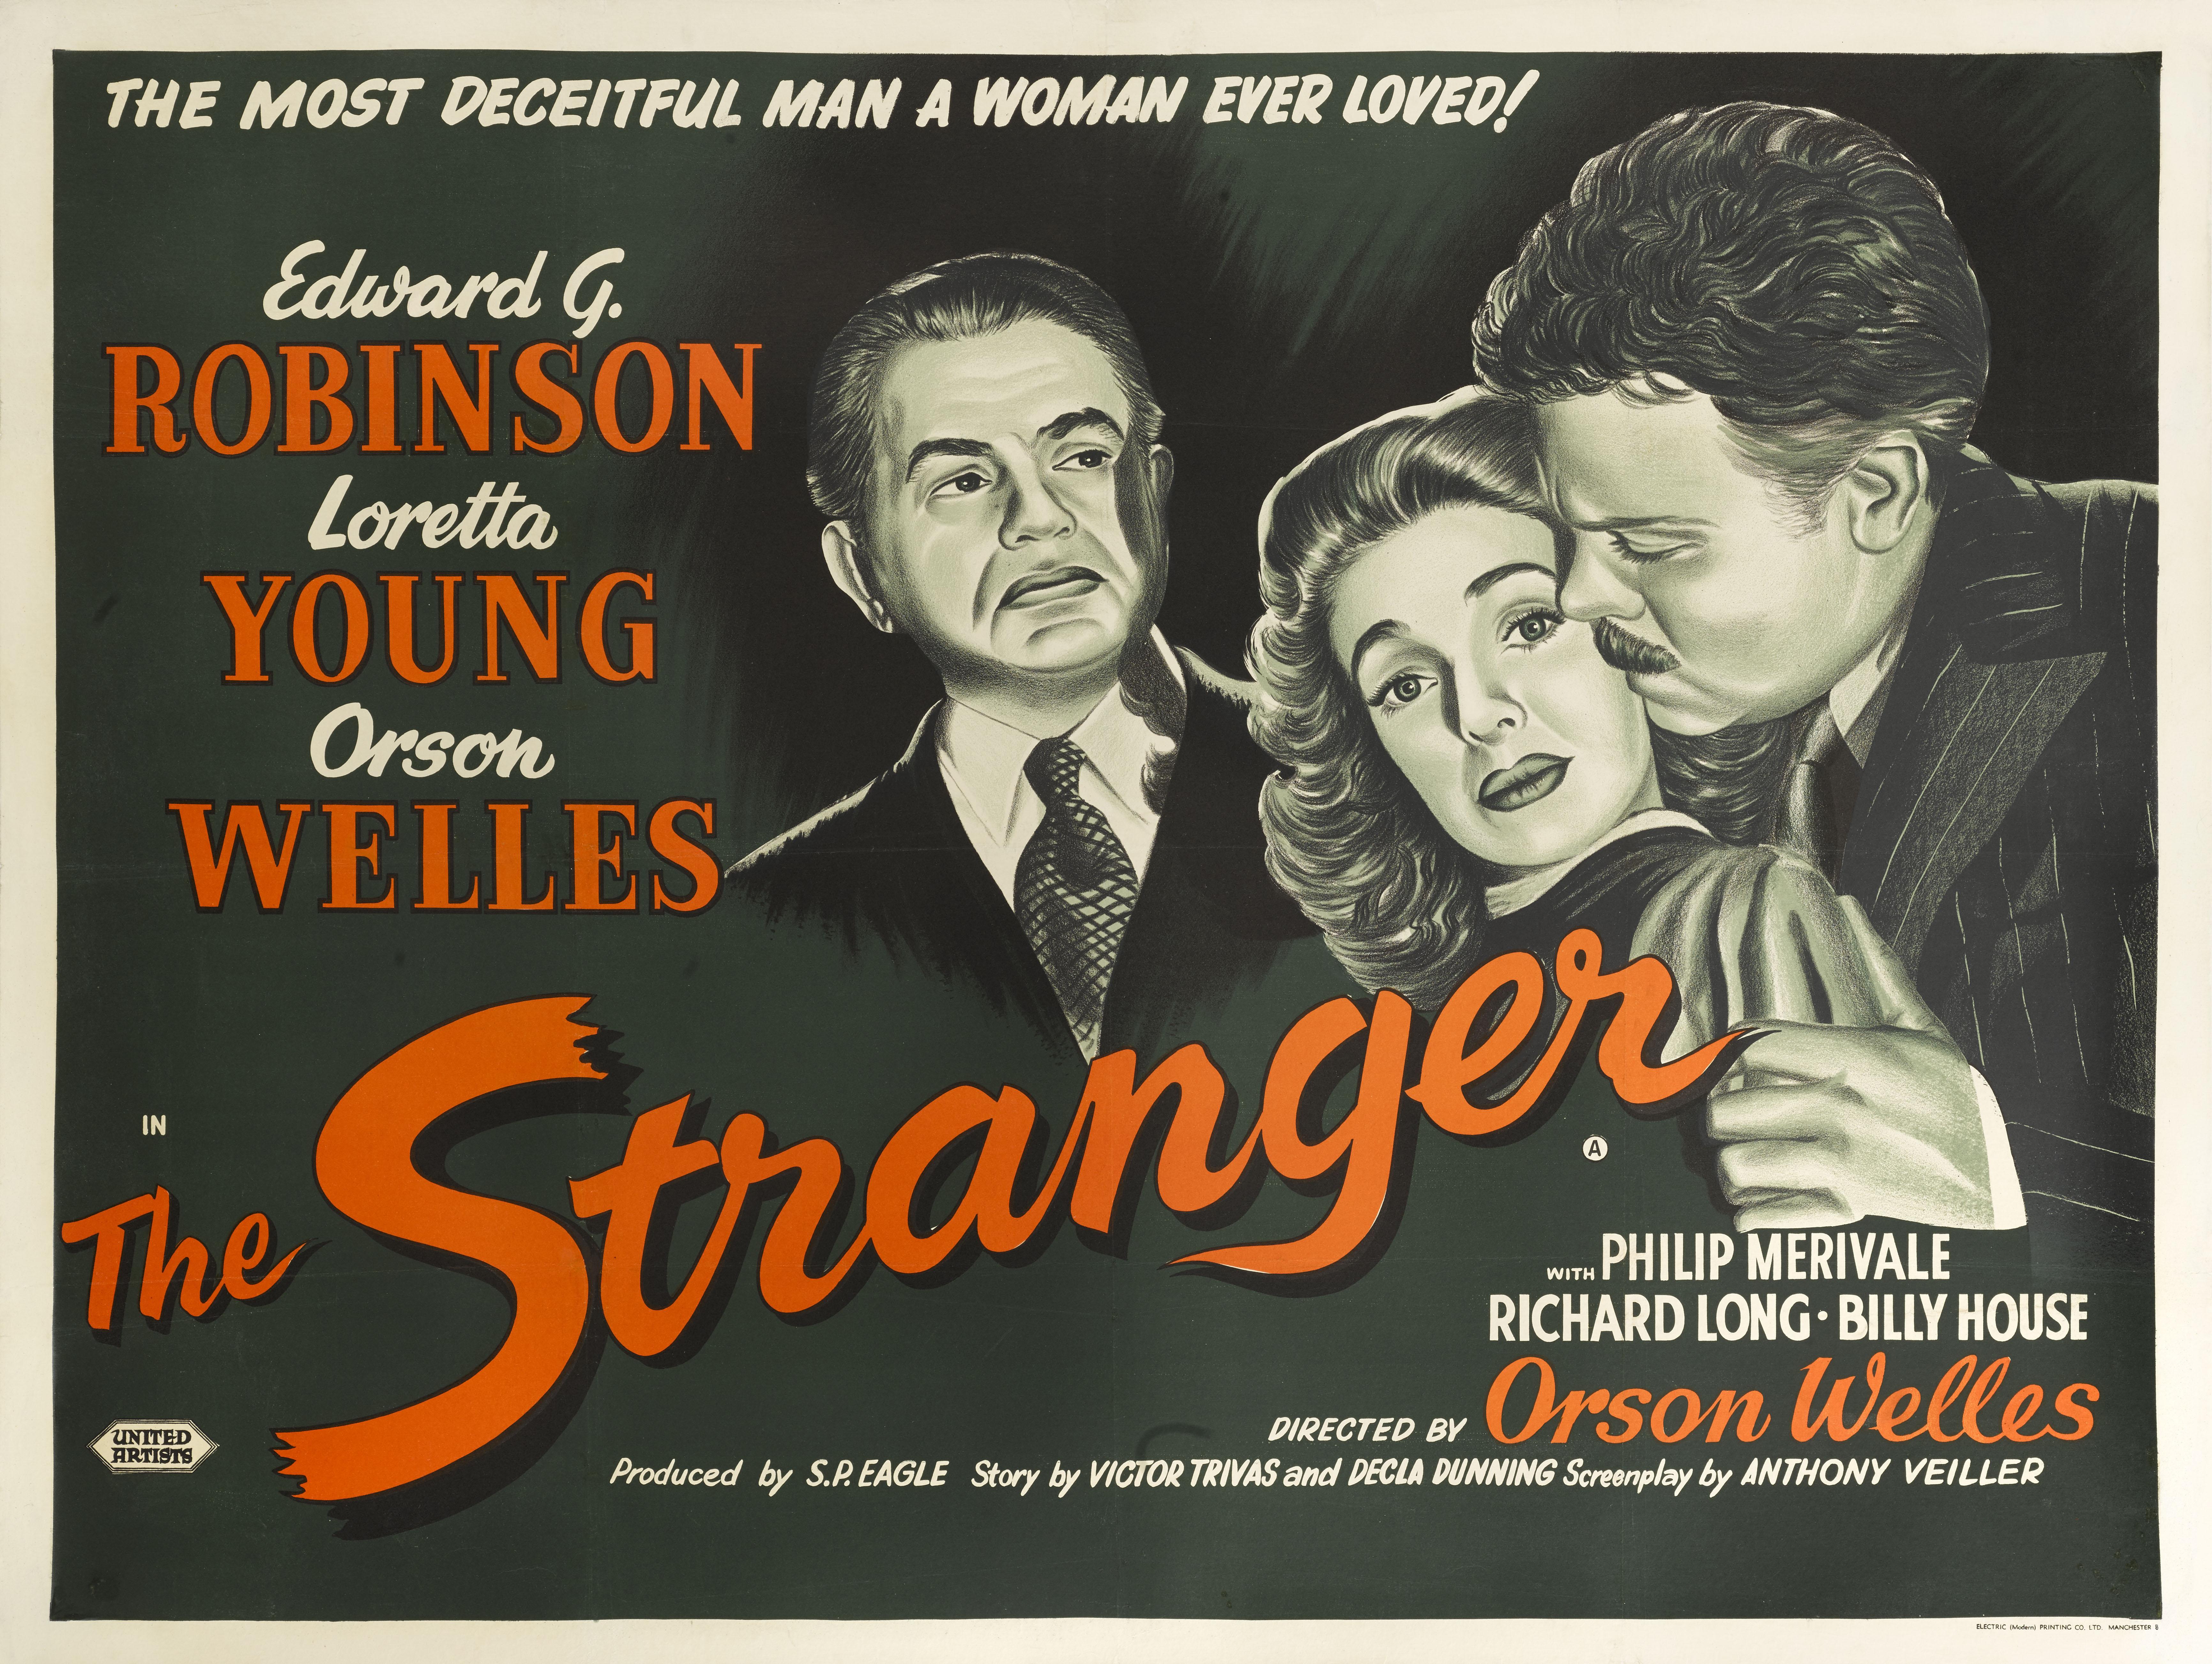 Original British movie poster for the 1946 Film Noir directed by Orson Welles and starred Edward G. Robinson, Orson Welles and Loretta Young. This poster is conservation linen backed and it would be shipped rolled in a strong tube.